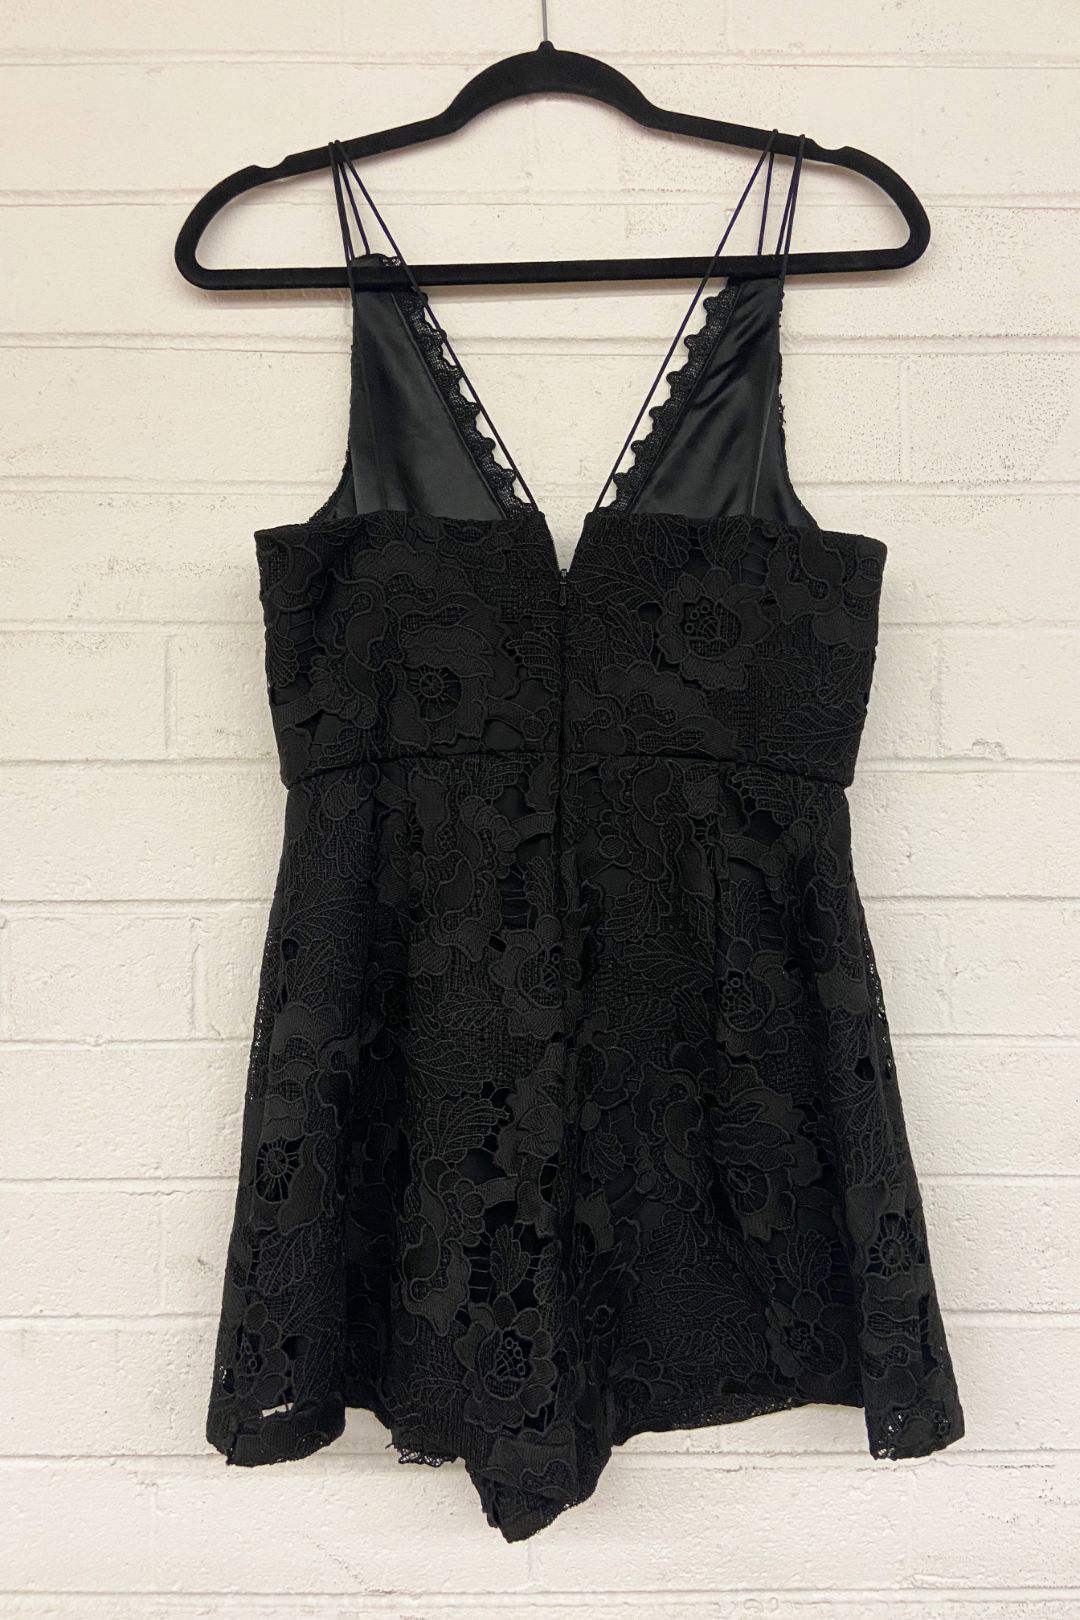 Forever New in Black Floral Lace Playsuit